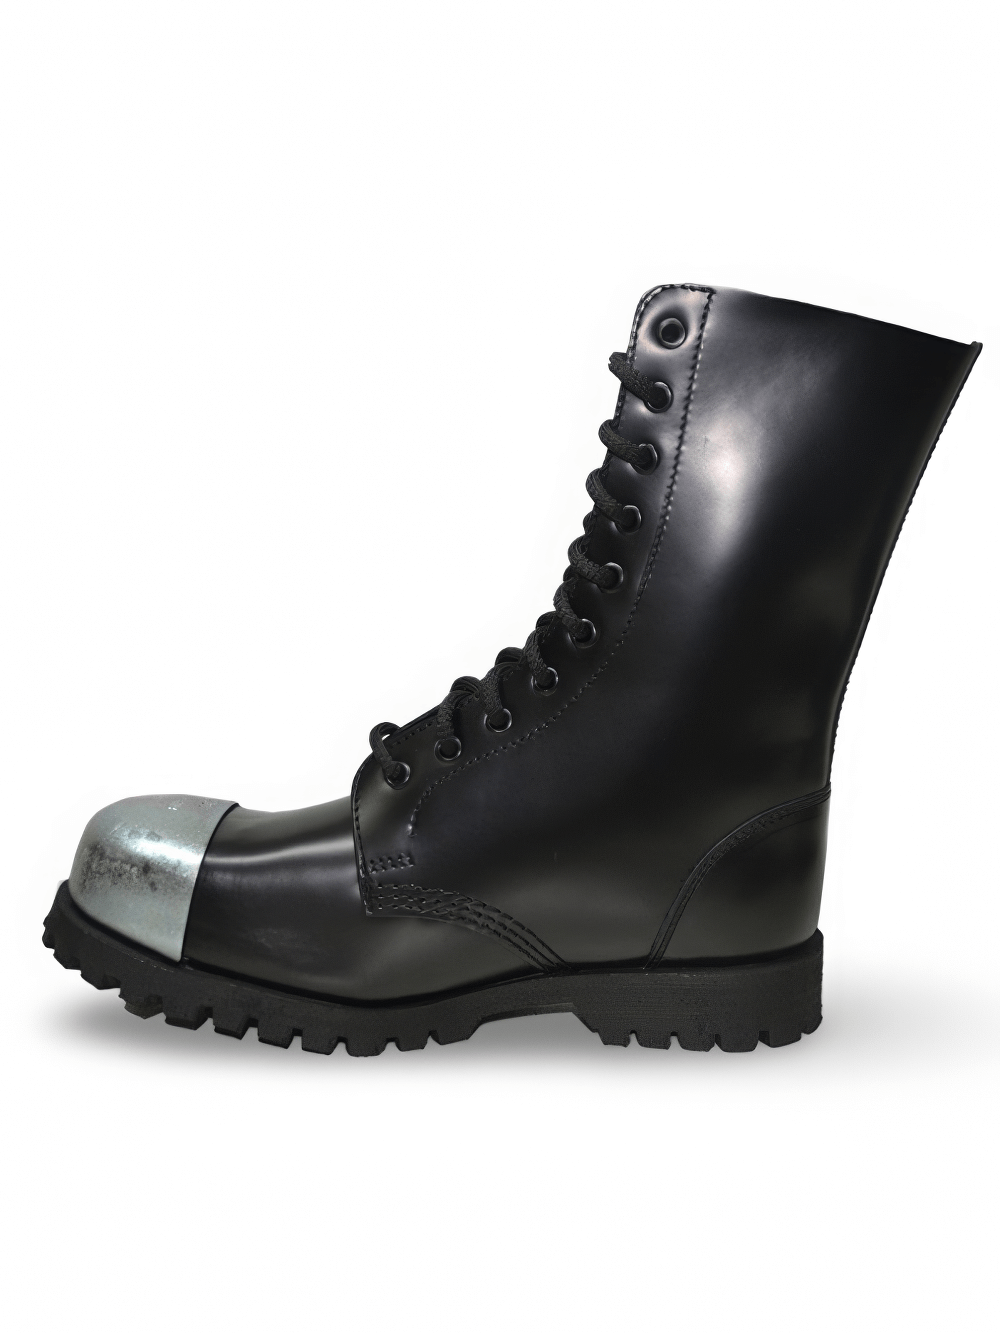 Unisex Black Leather Boots with Steel Toe Cap